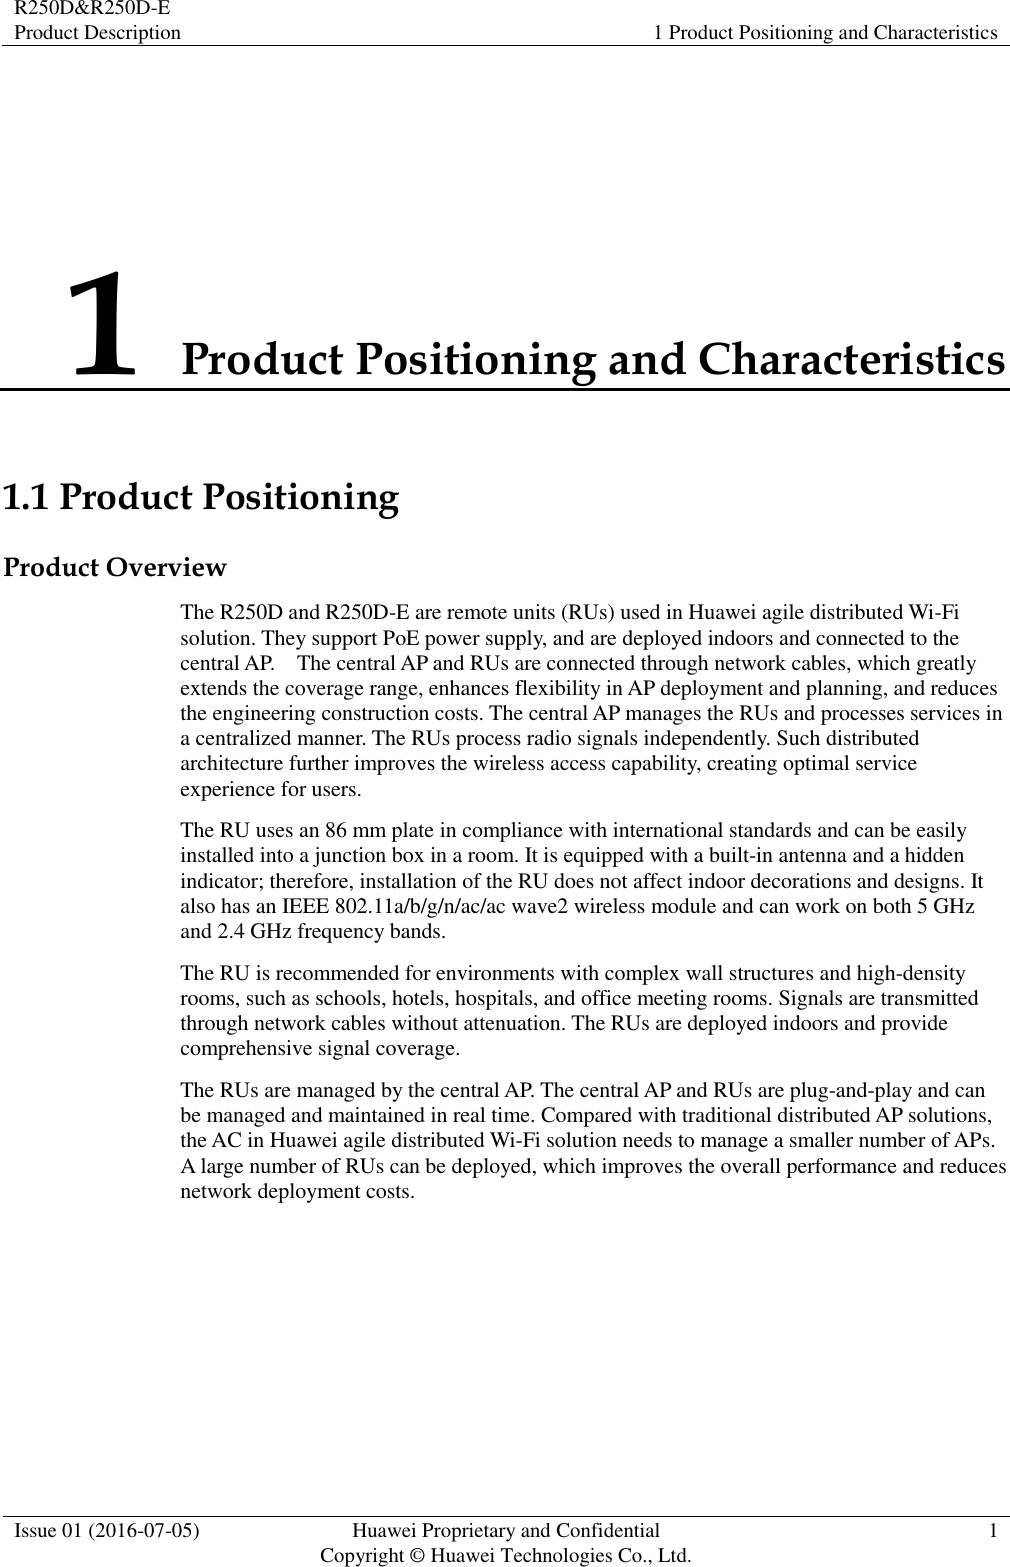 R250D&amp;R250D-E Product Description 1 Product Positioning and Characteristics  Issue 01 (2016-07-05) Huawei Proprietary and Confidential                                     Copyright © Huawei Technologies Co., Ltd. 1  1 Product Positioning and Characteristics 1.1 Product Positioning Product Overview The R250D and R250D-E are remote units (RUs) used in Huawei agile distributed Wi-Fi solution. They support PoE power supply, and are deployed indoors and connected to the central AP.    The central AP and RUs are connected through network cables, which greatly extends the coverage range, enhances flexibility in AP deployment and planning, and reduces the engineering construction costs. The central AP manages the RUs and processes services in a centralized manner. The RUs process radio signals independently. Such distributed architecture further improves the wireless access capability, creating optimal service experience for users. The RU uses an 86 mm plate in compliance with international standards and can be easily installed into a junction box in a room. It is equipped with a built-in antenna and a hidden indicator; therefore, installation of the RU does not affect indoor decorations and designs. It also has an IEEE 802.11a/b/g/n/ac/ac wave2 wireless module and can work on both 5 GHz and 2.4 GHz frequency bands. The RU is recommended for environments with complex wall structures and high-density rooms, such as schools, hotels, hospitals, and office meeting rooms. Signals are transmitted through network cables without attenuation. The RUs are deployed indoors and provide comprehensive signal coverage. The RUs are managed by the central AP. The central AP and RUs are plug-and-play and can be managed and maintained in real time. Compared with traditional distributed AP solutions, the AC in Huawei agile distributed Wi-Fi solution needs to manage a smaller number of APs. A large number of RUs can be deployed, which improves the overall performance and reduces network deployment costs. 